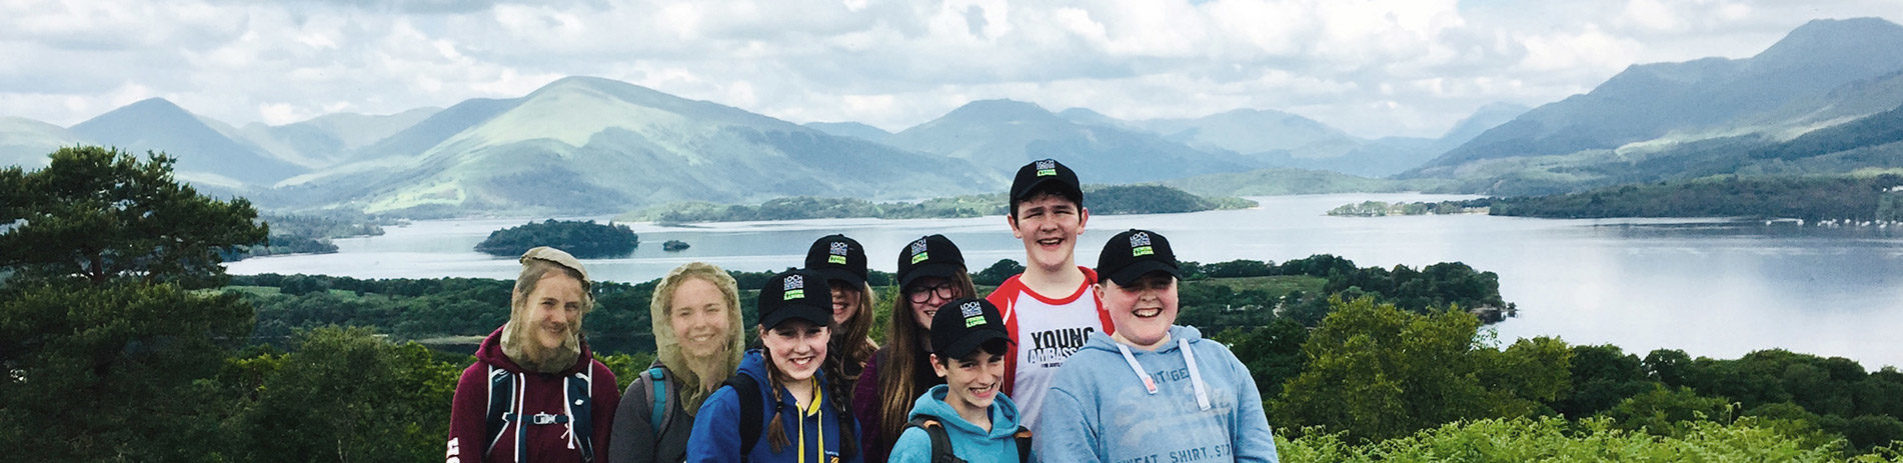 young-volunteers-with-national-park-some-wearing-midge-nets-smiling-for-camera-at-summit-of-inchcailloch-with-stunning-views-behind-of-island-loch-lomond-and-surrounding-hills-including-ben-lomond